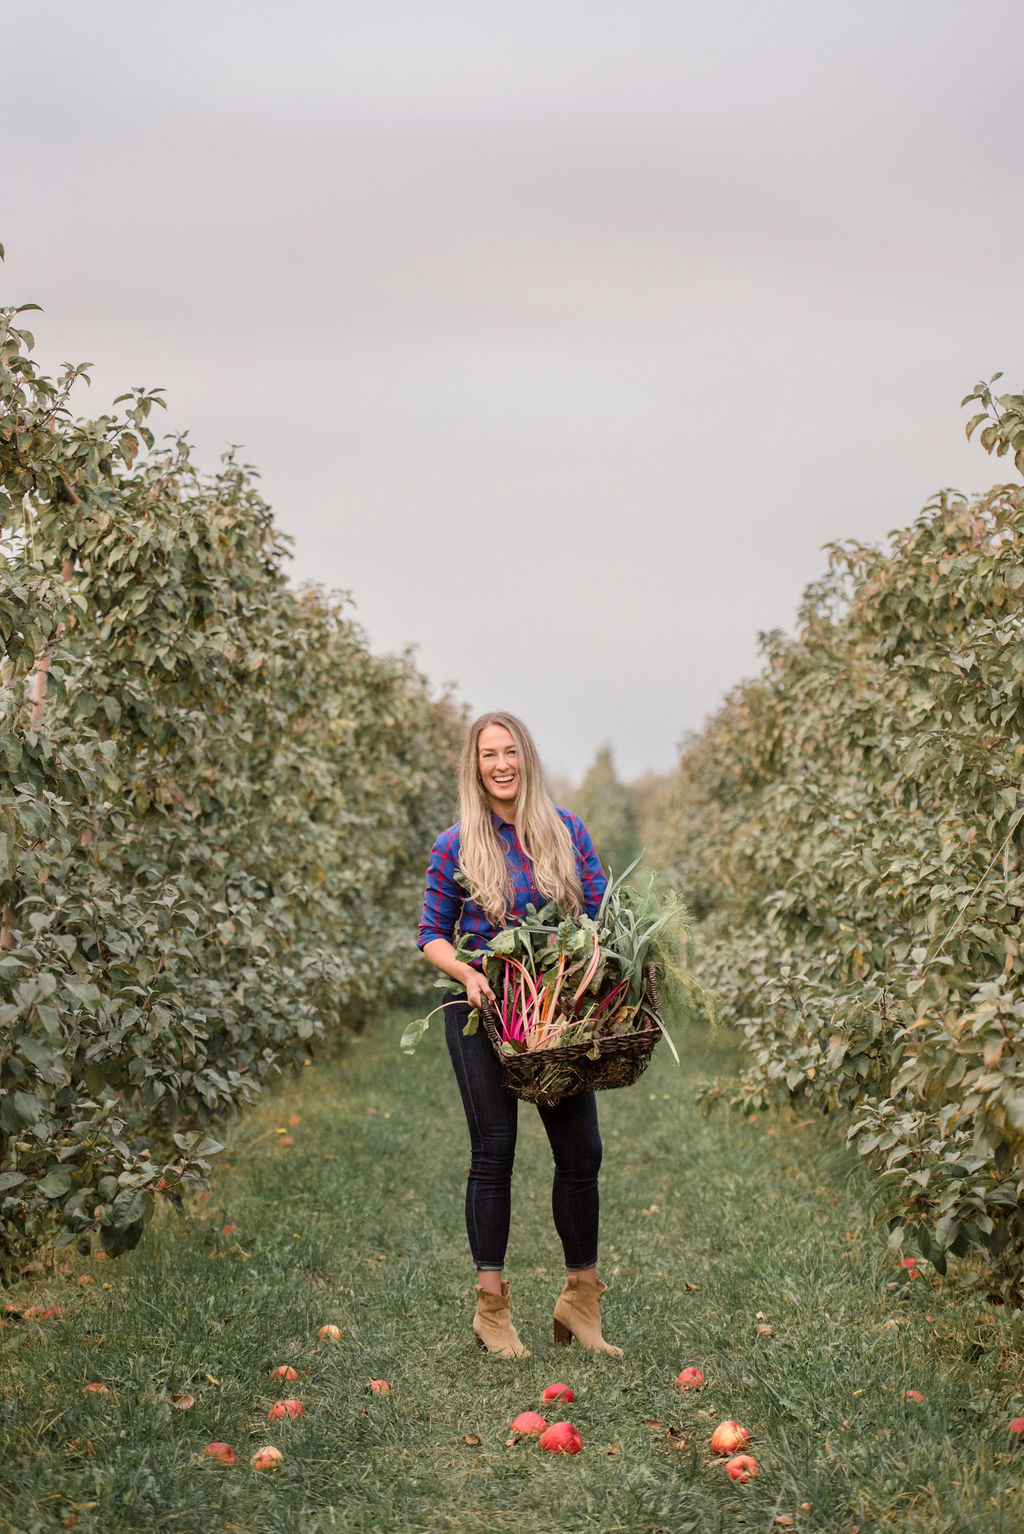 Chef Siiri Sampson stands in an apple orchard with a basket full of fresh produce grown from her garden.